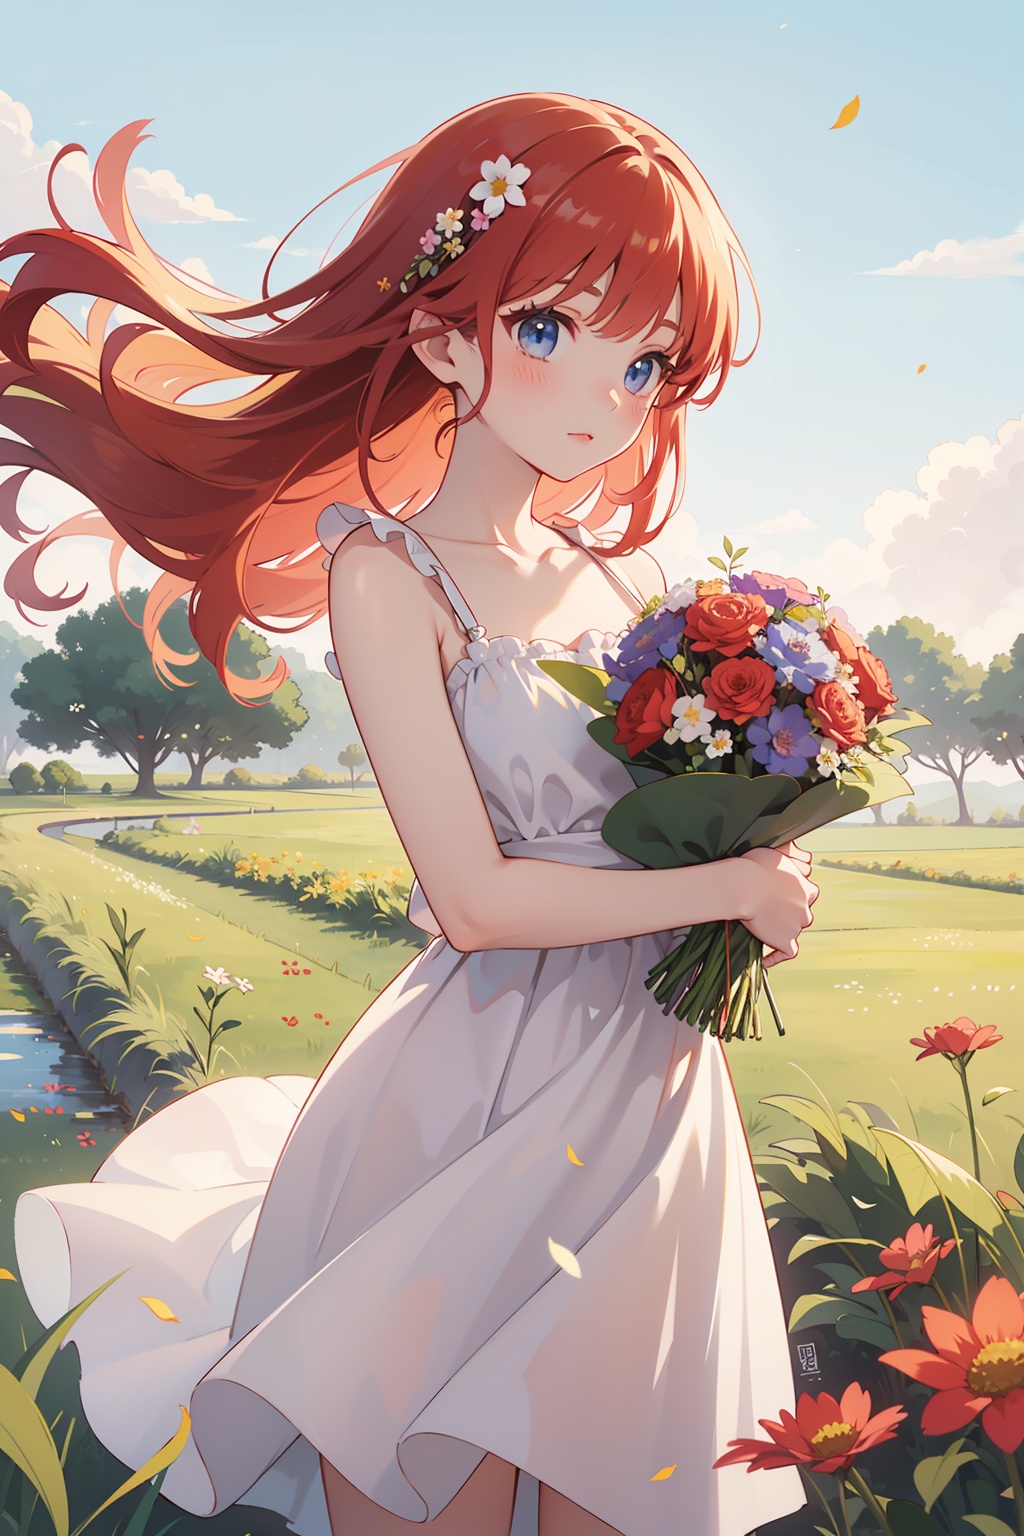 upper body, Create an image of an anime girl with bright red hair, wearing a sundress and holding a bouquet of wildflowers, standing in a field of tall grass with a soft breeze blowing through. The scene should capture the whimsical and carefree style of Sakimichan, with a sense of peace and tranquility in the air.